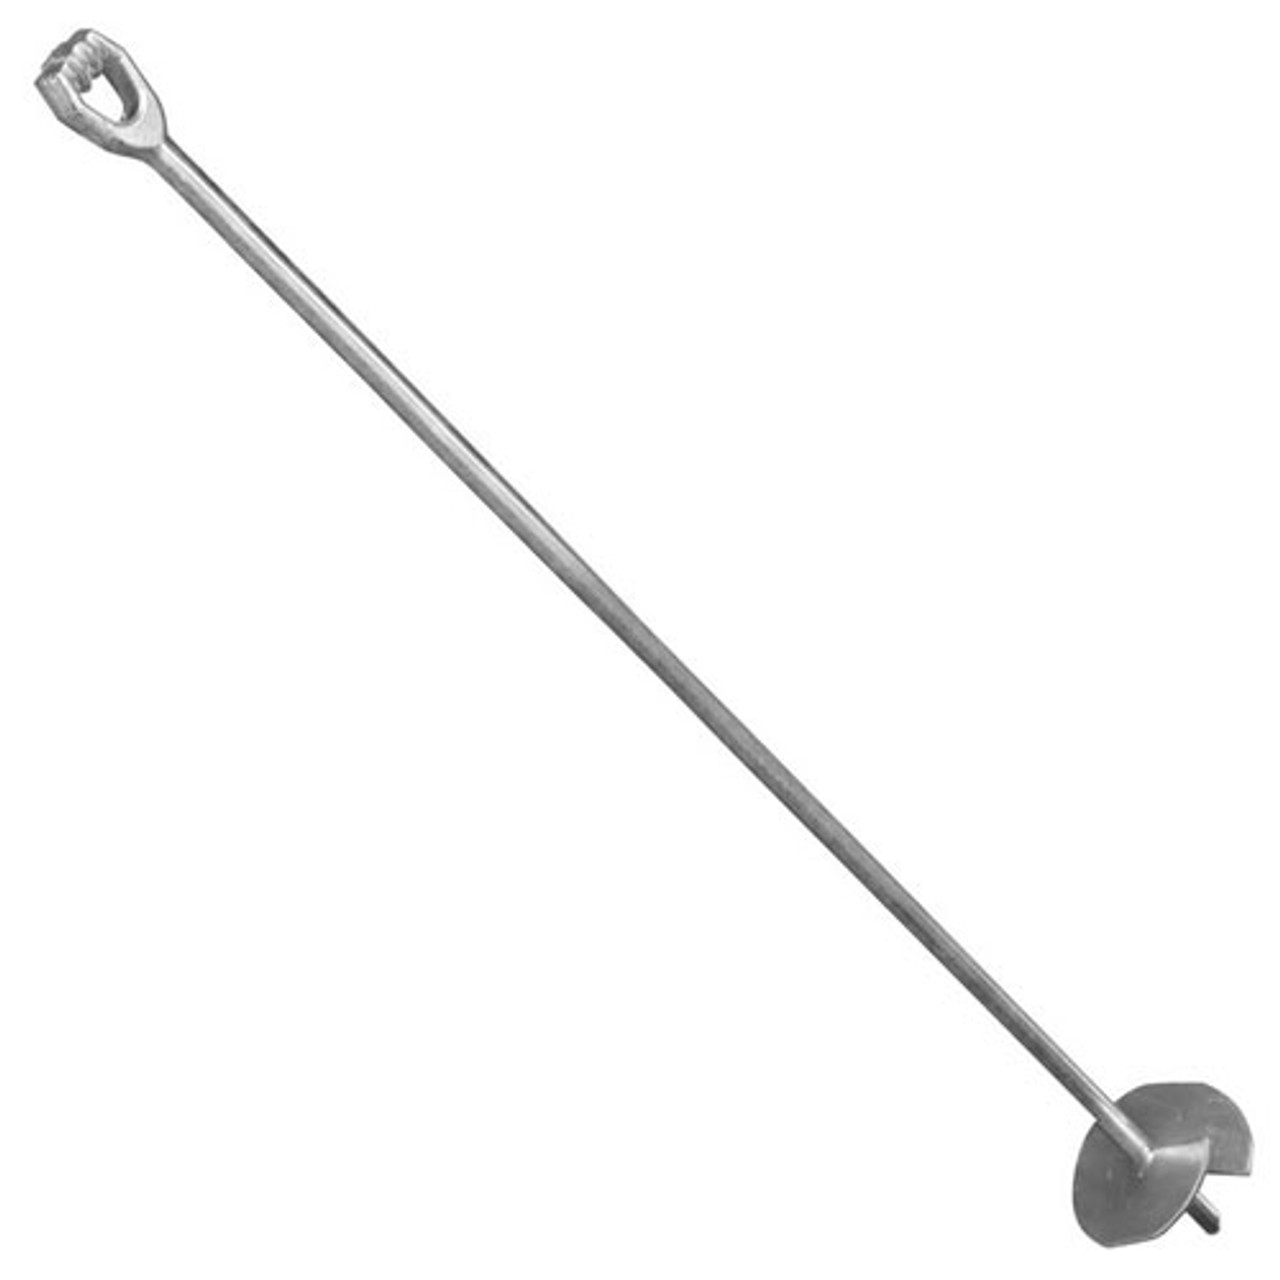 Adjustable Line Length Anchor Hook Heavy Duty Stainless Steel – 3